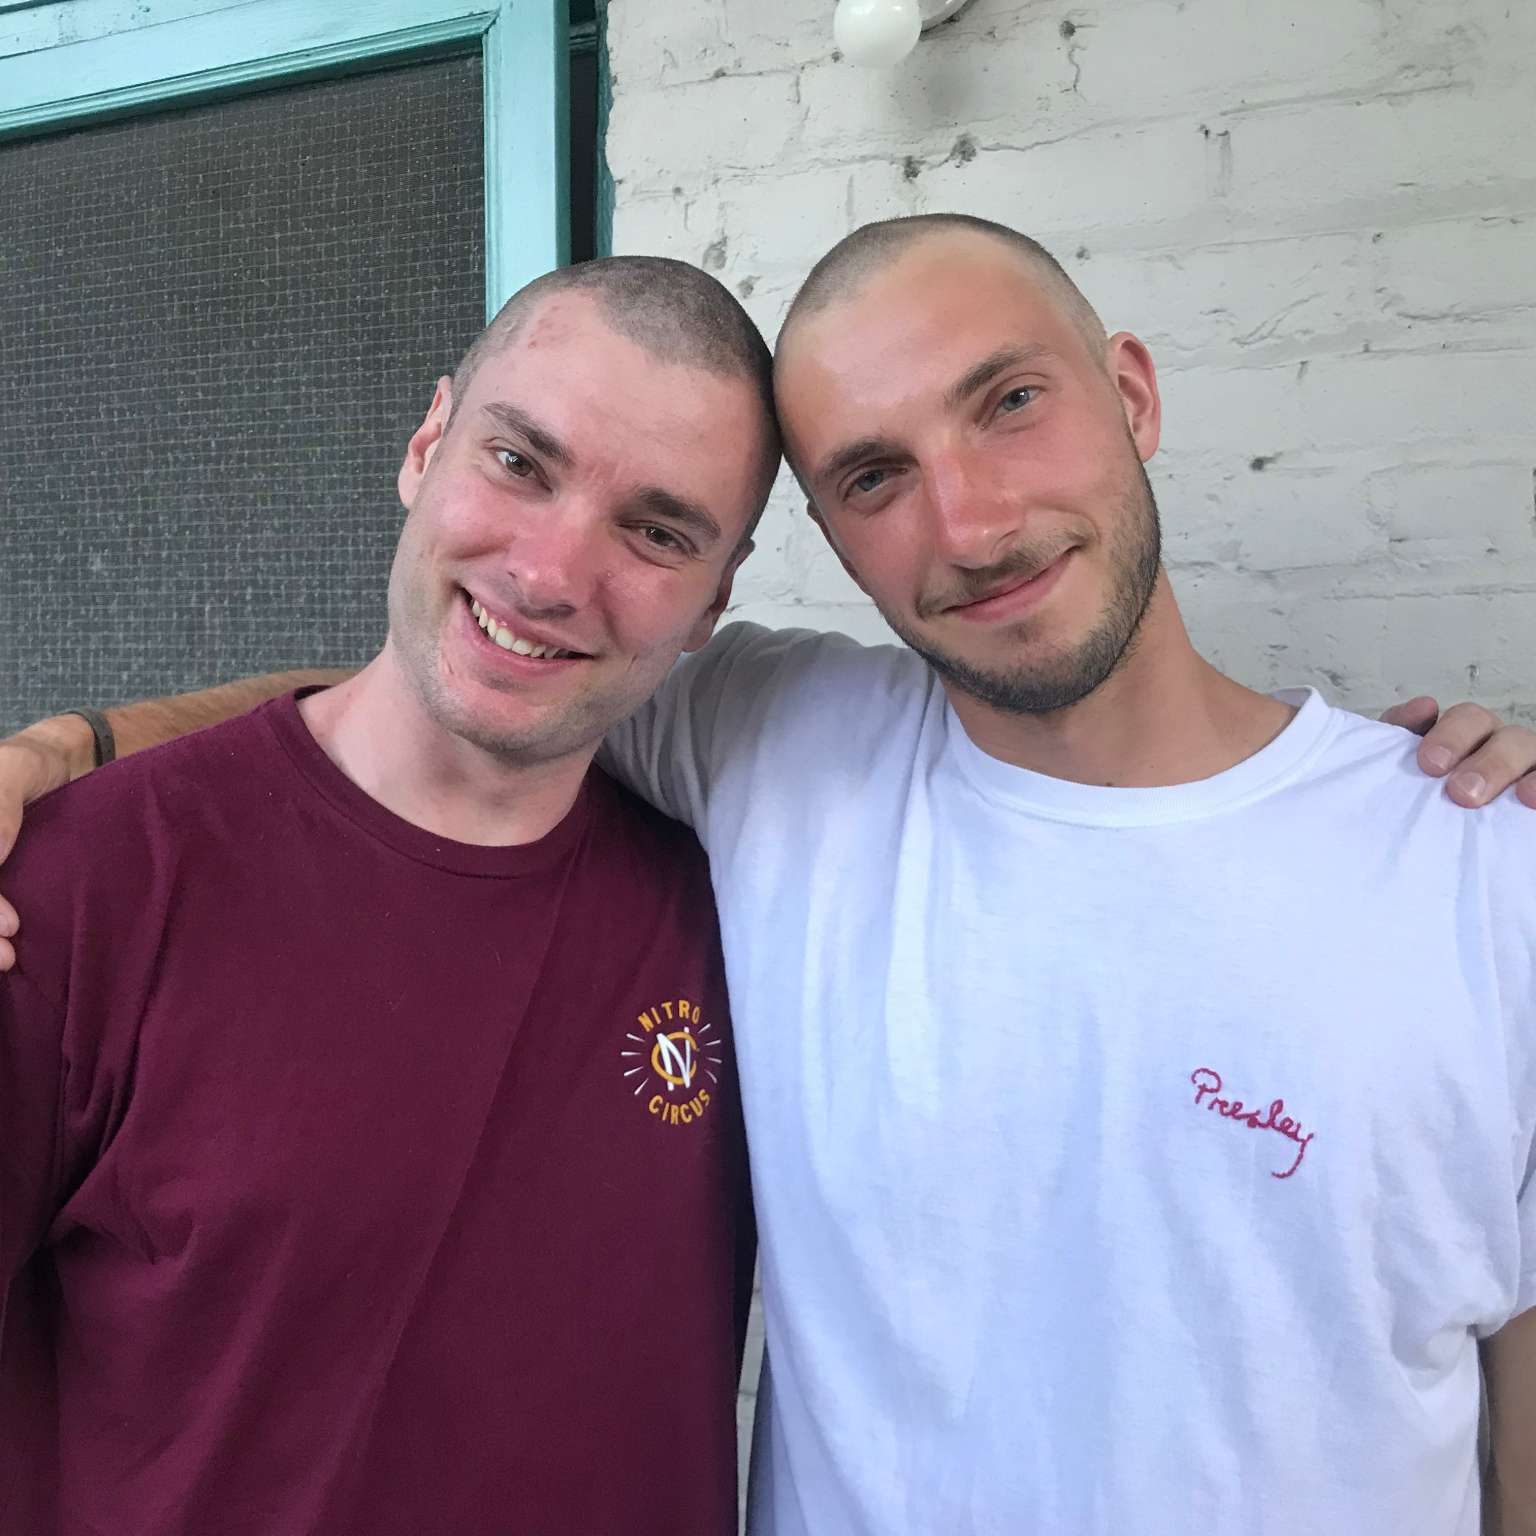 Steven's friend Blake shaves his head as a sign of support toward testicular cancer diagnosis